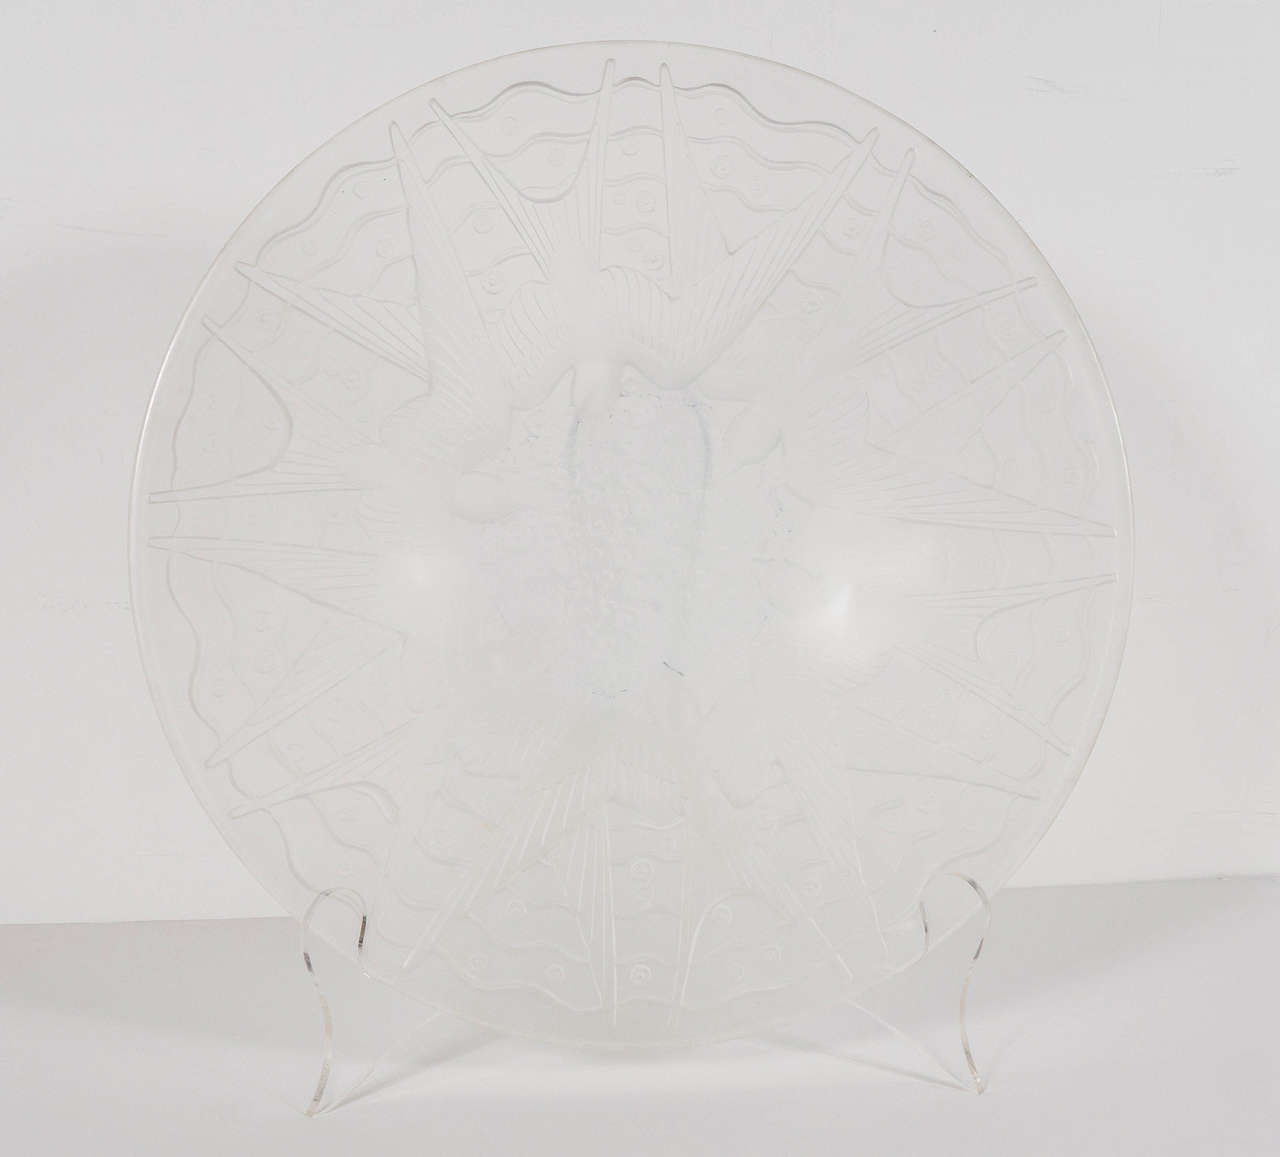 French Exquisite Art Deco Glass Bowl by Pierre D'Avesn with Overlapping Swallows